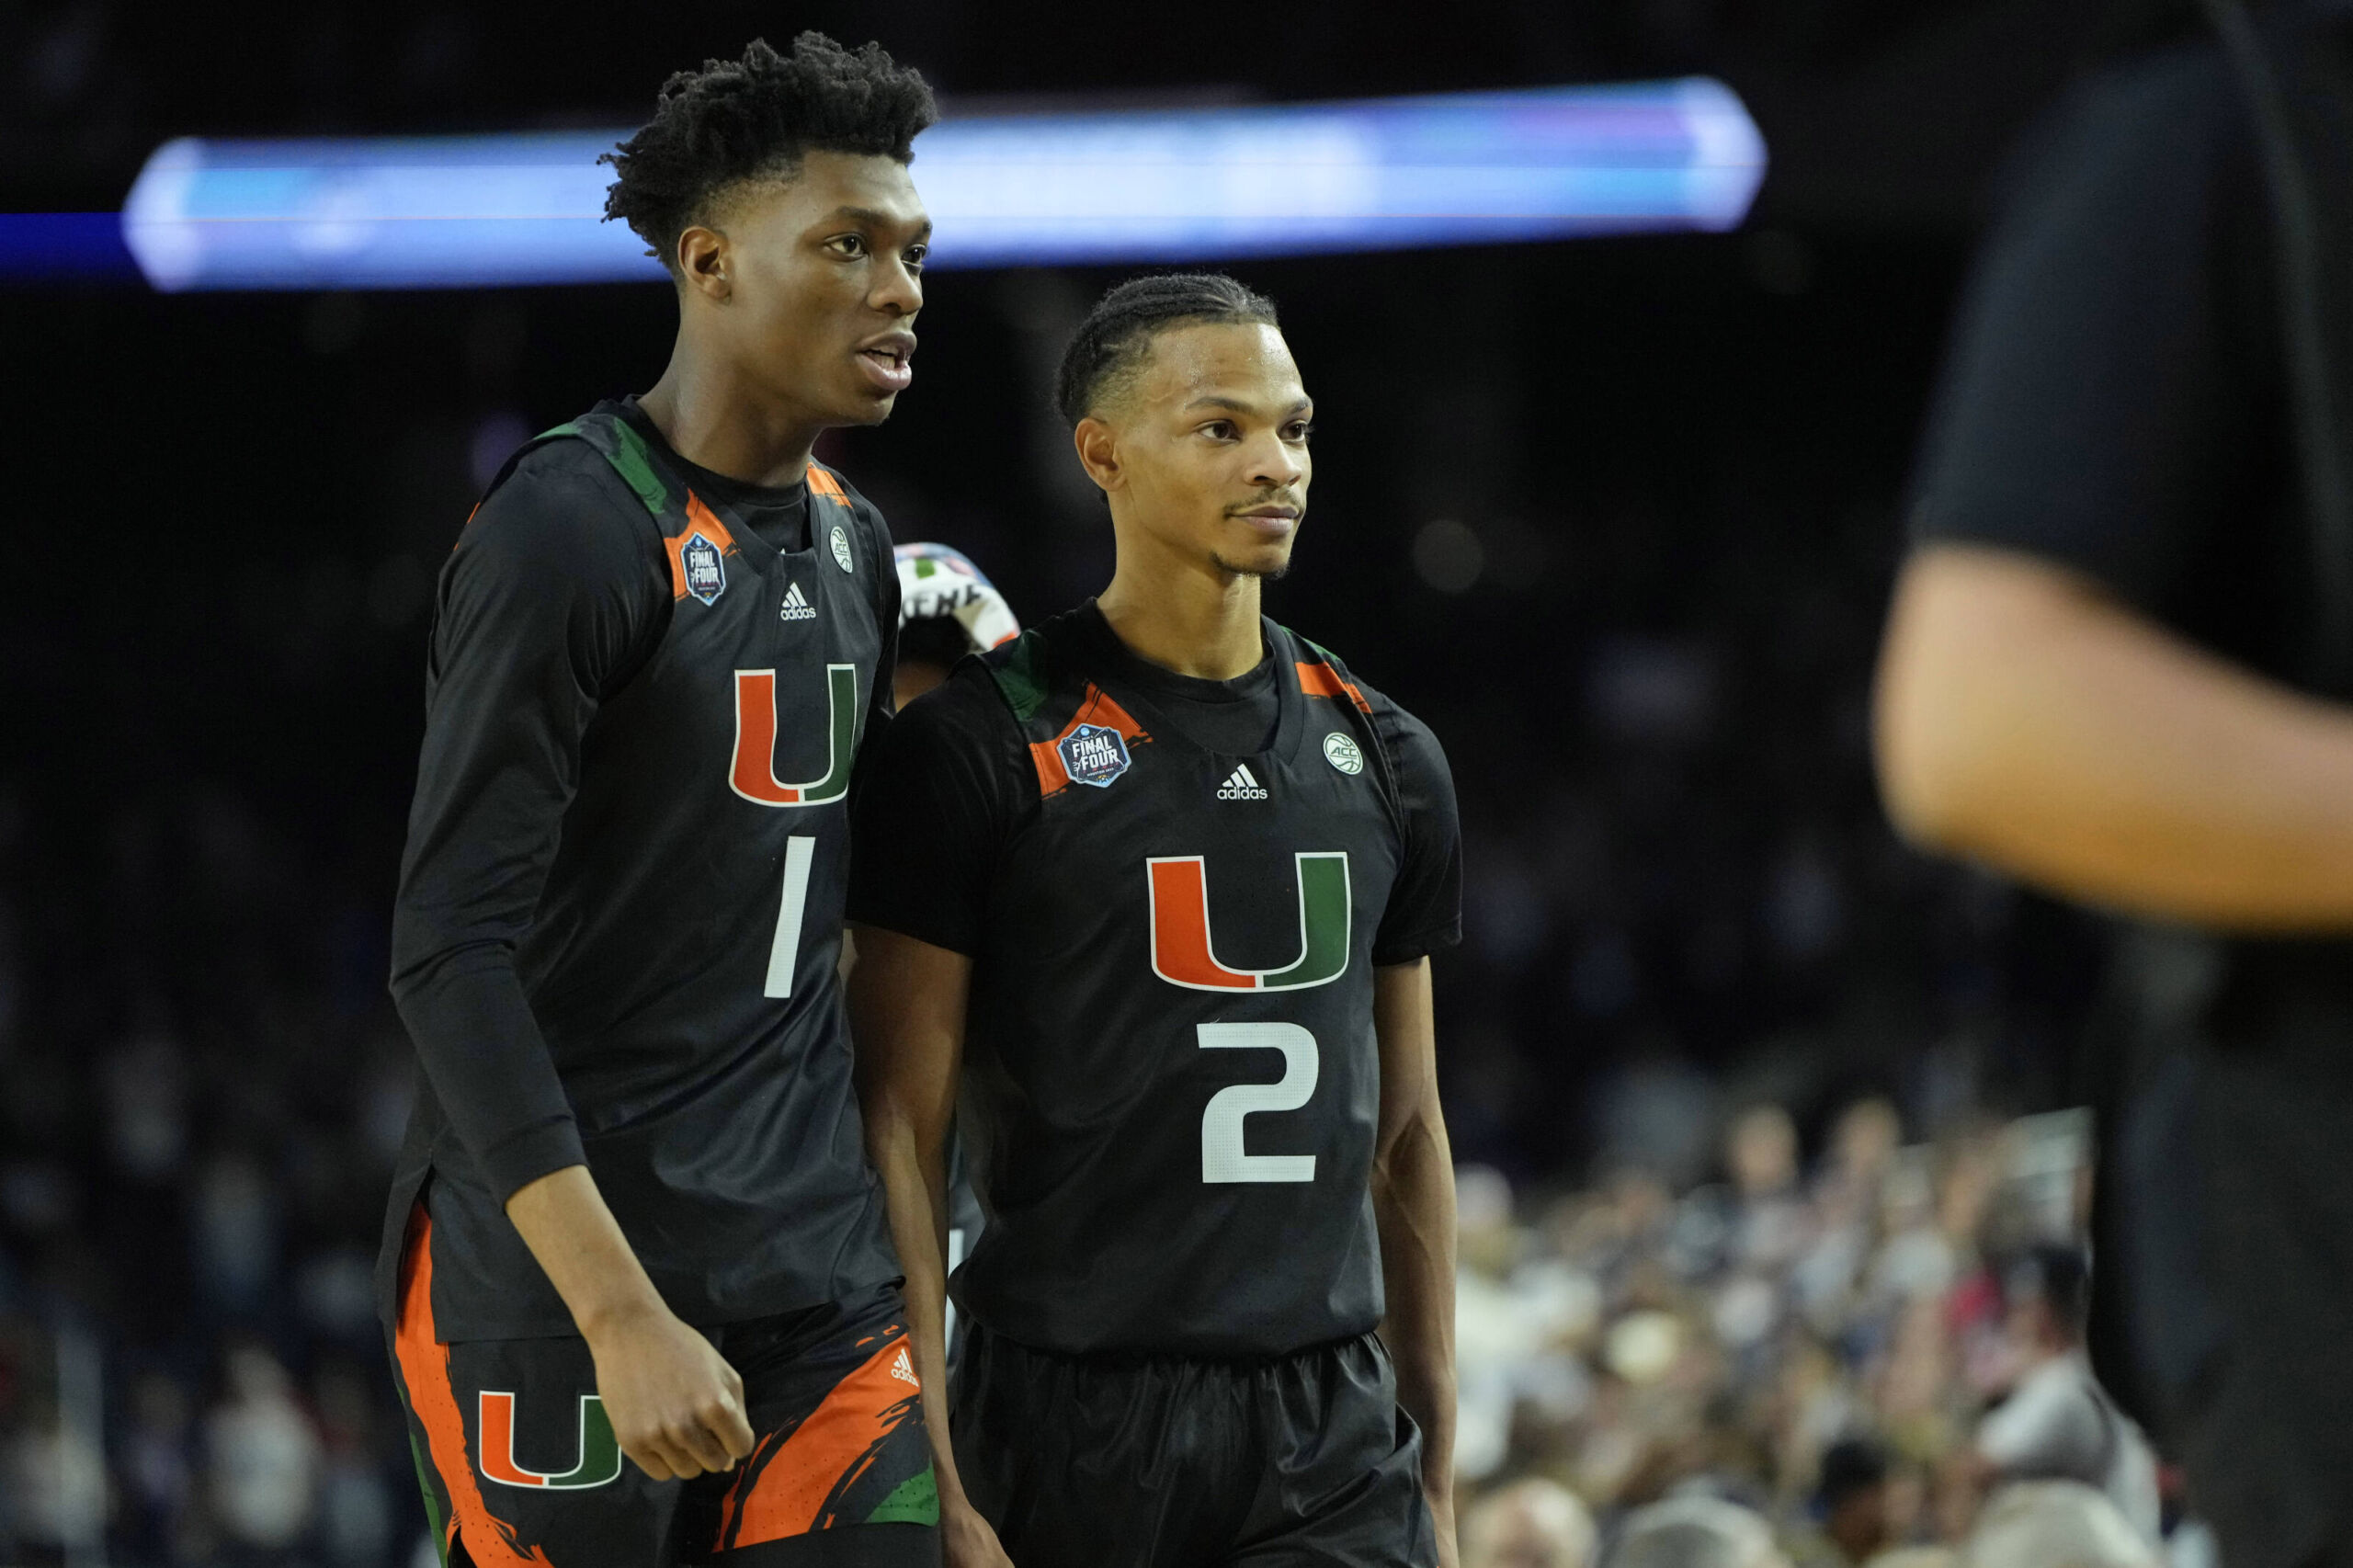 Category 5 is looking - Miami Hurricanes Men's Basketball